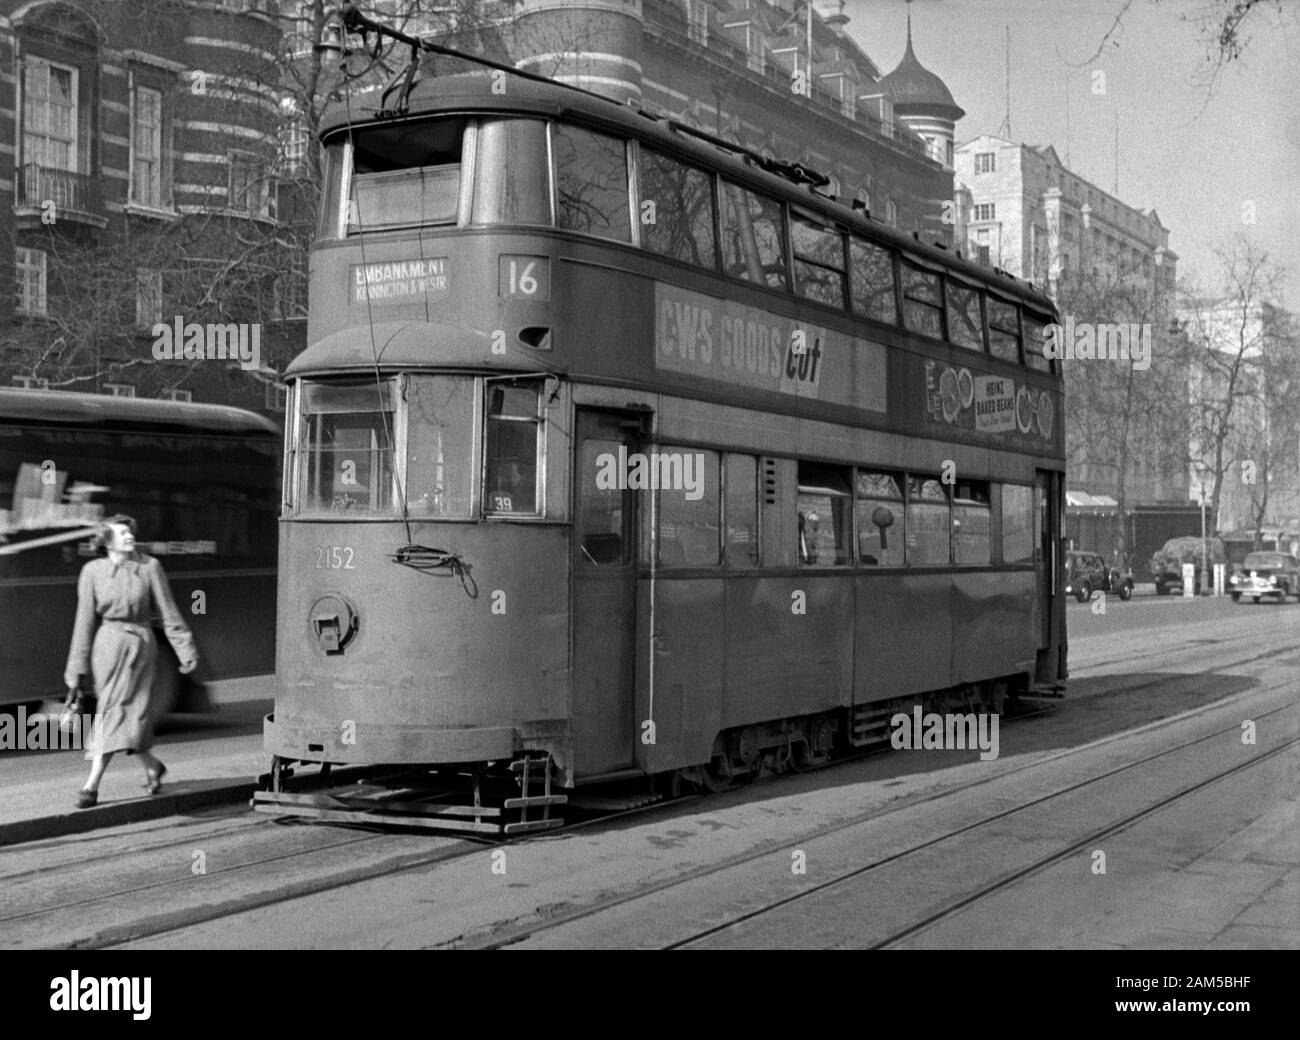 London Tram No 2152 0n Route 16 to the Embankment. Circa late 1940s/early 1950s Stock Photo